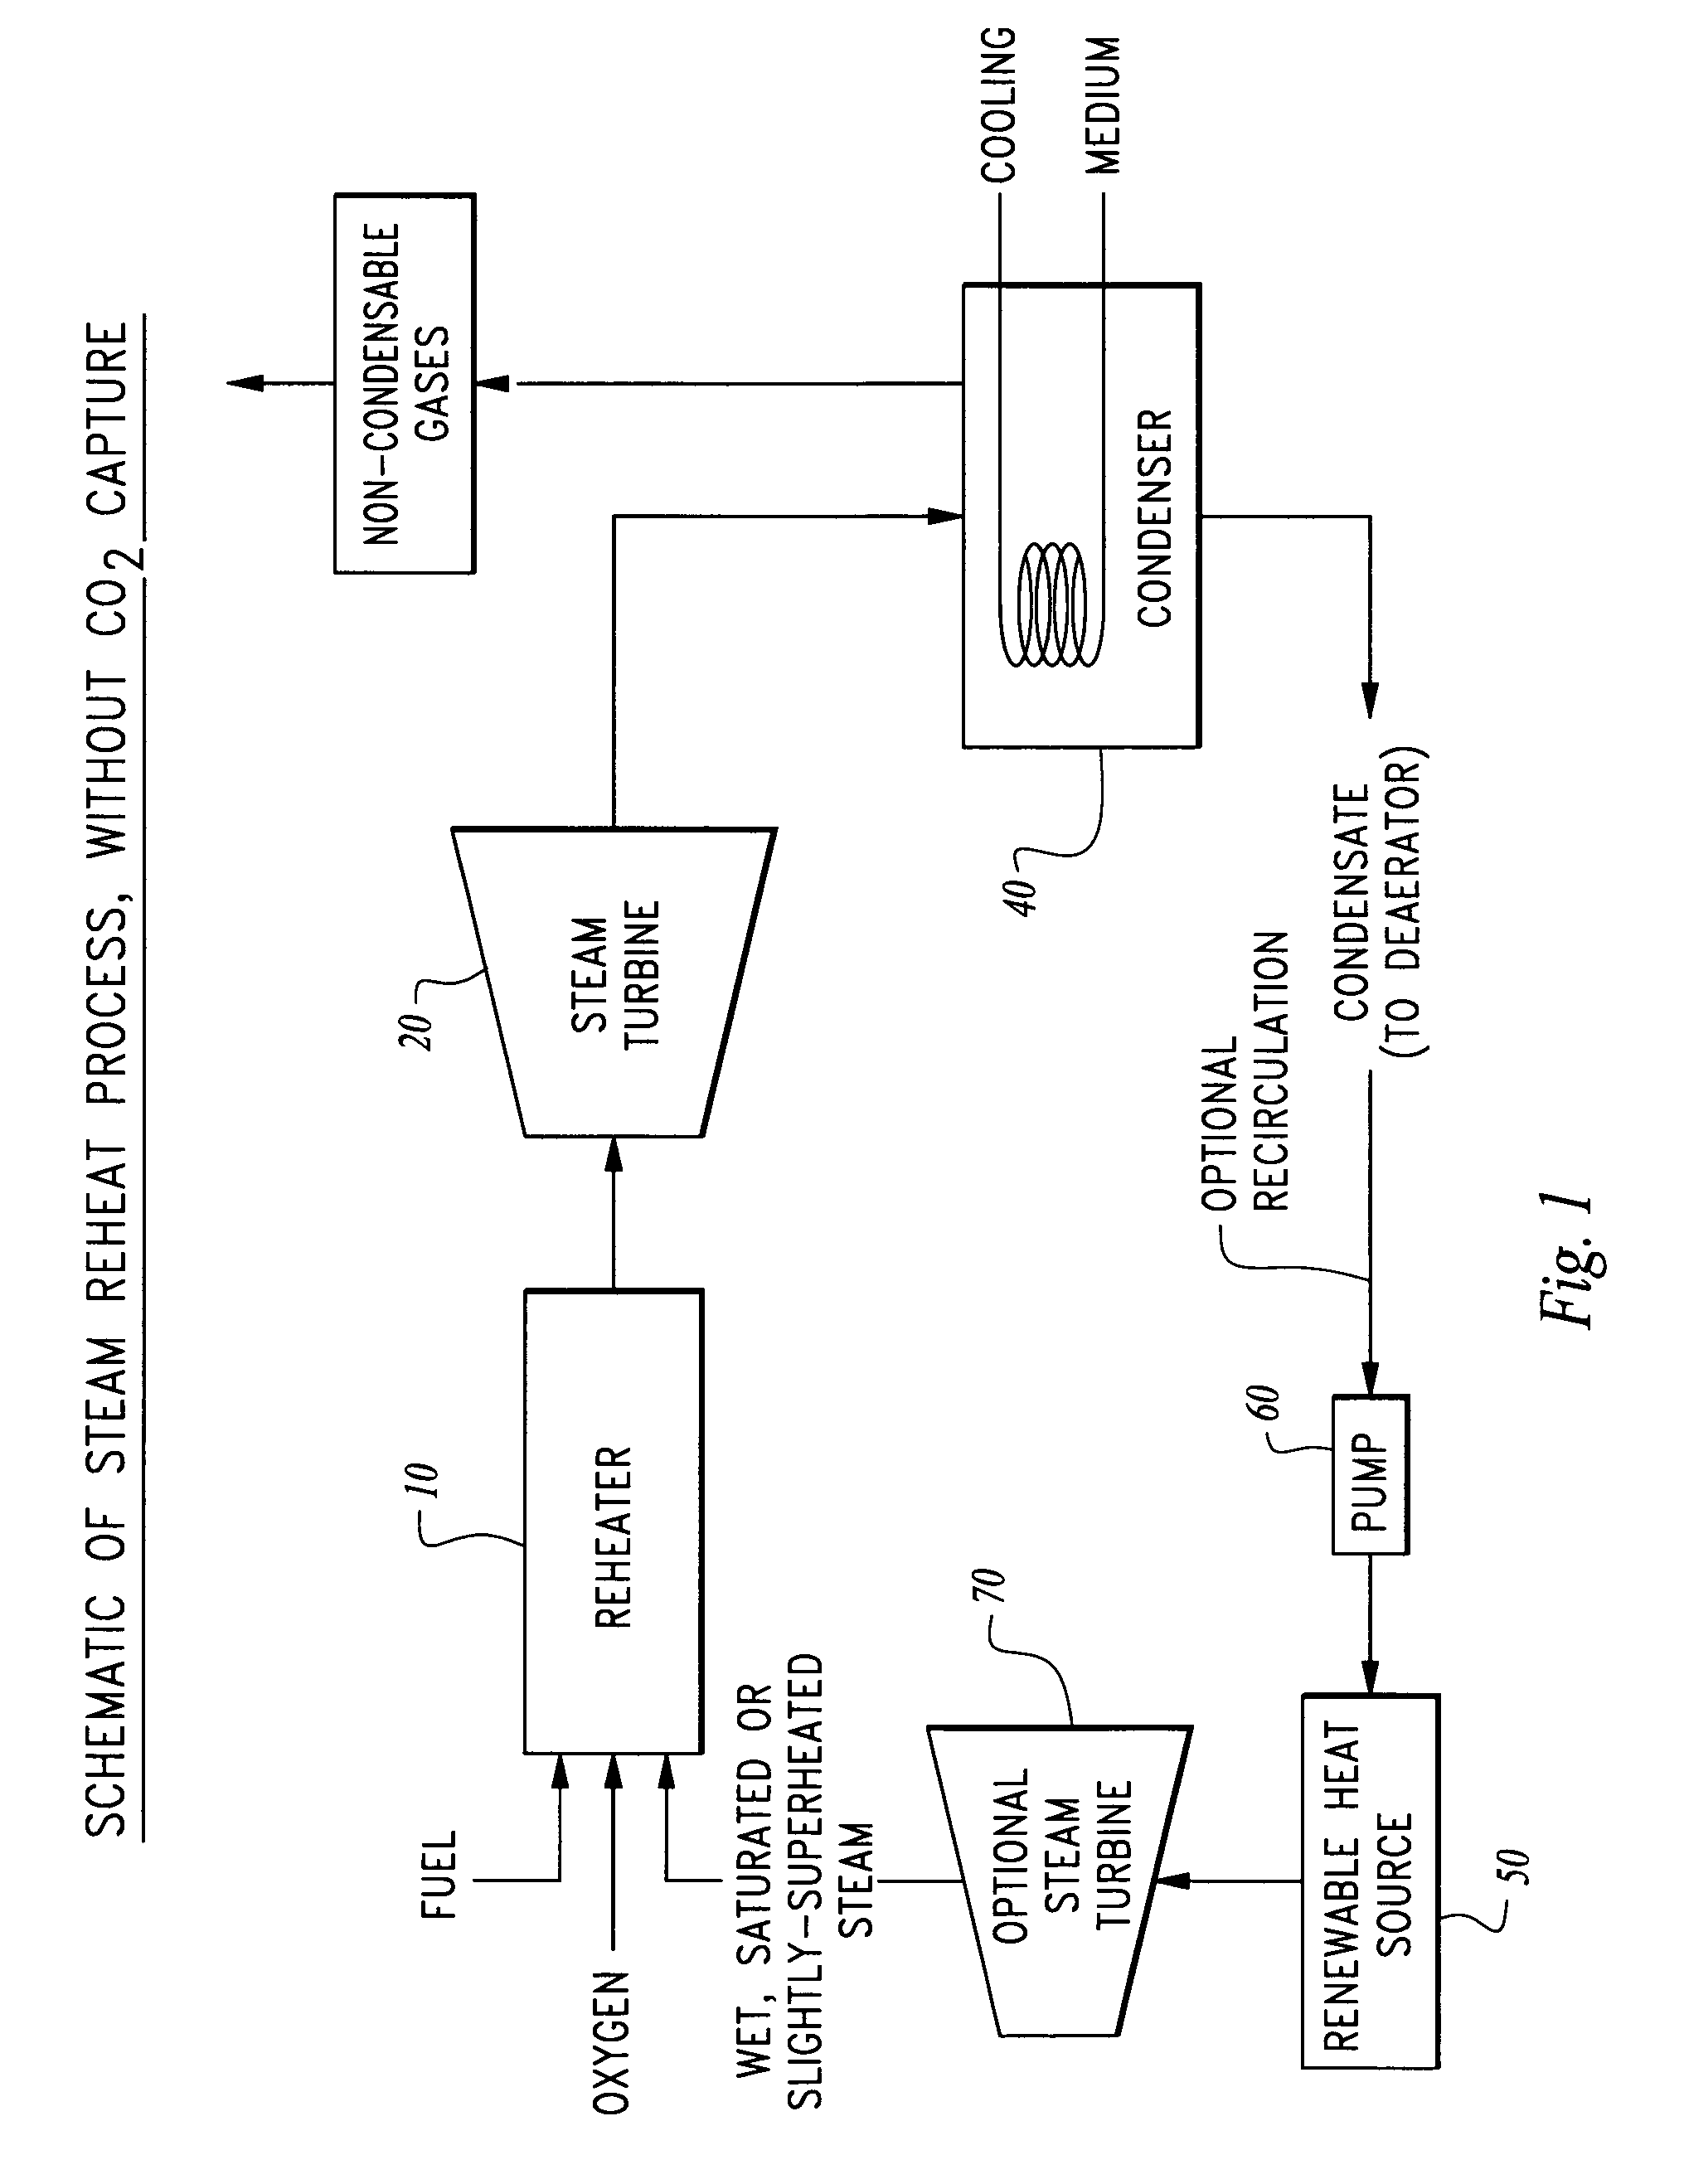 Method and system for enhancing power output of renewable thermal cycle power plants